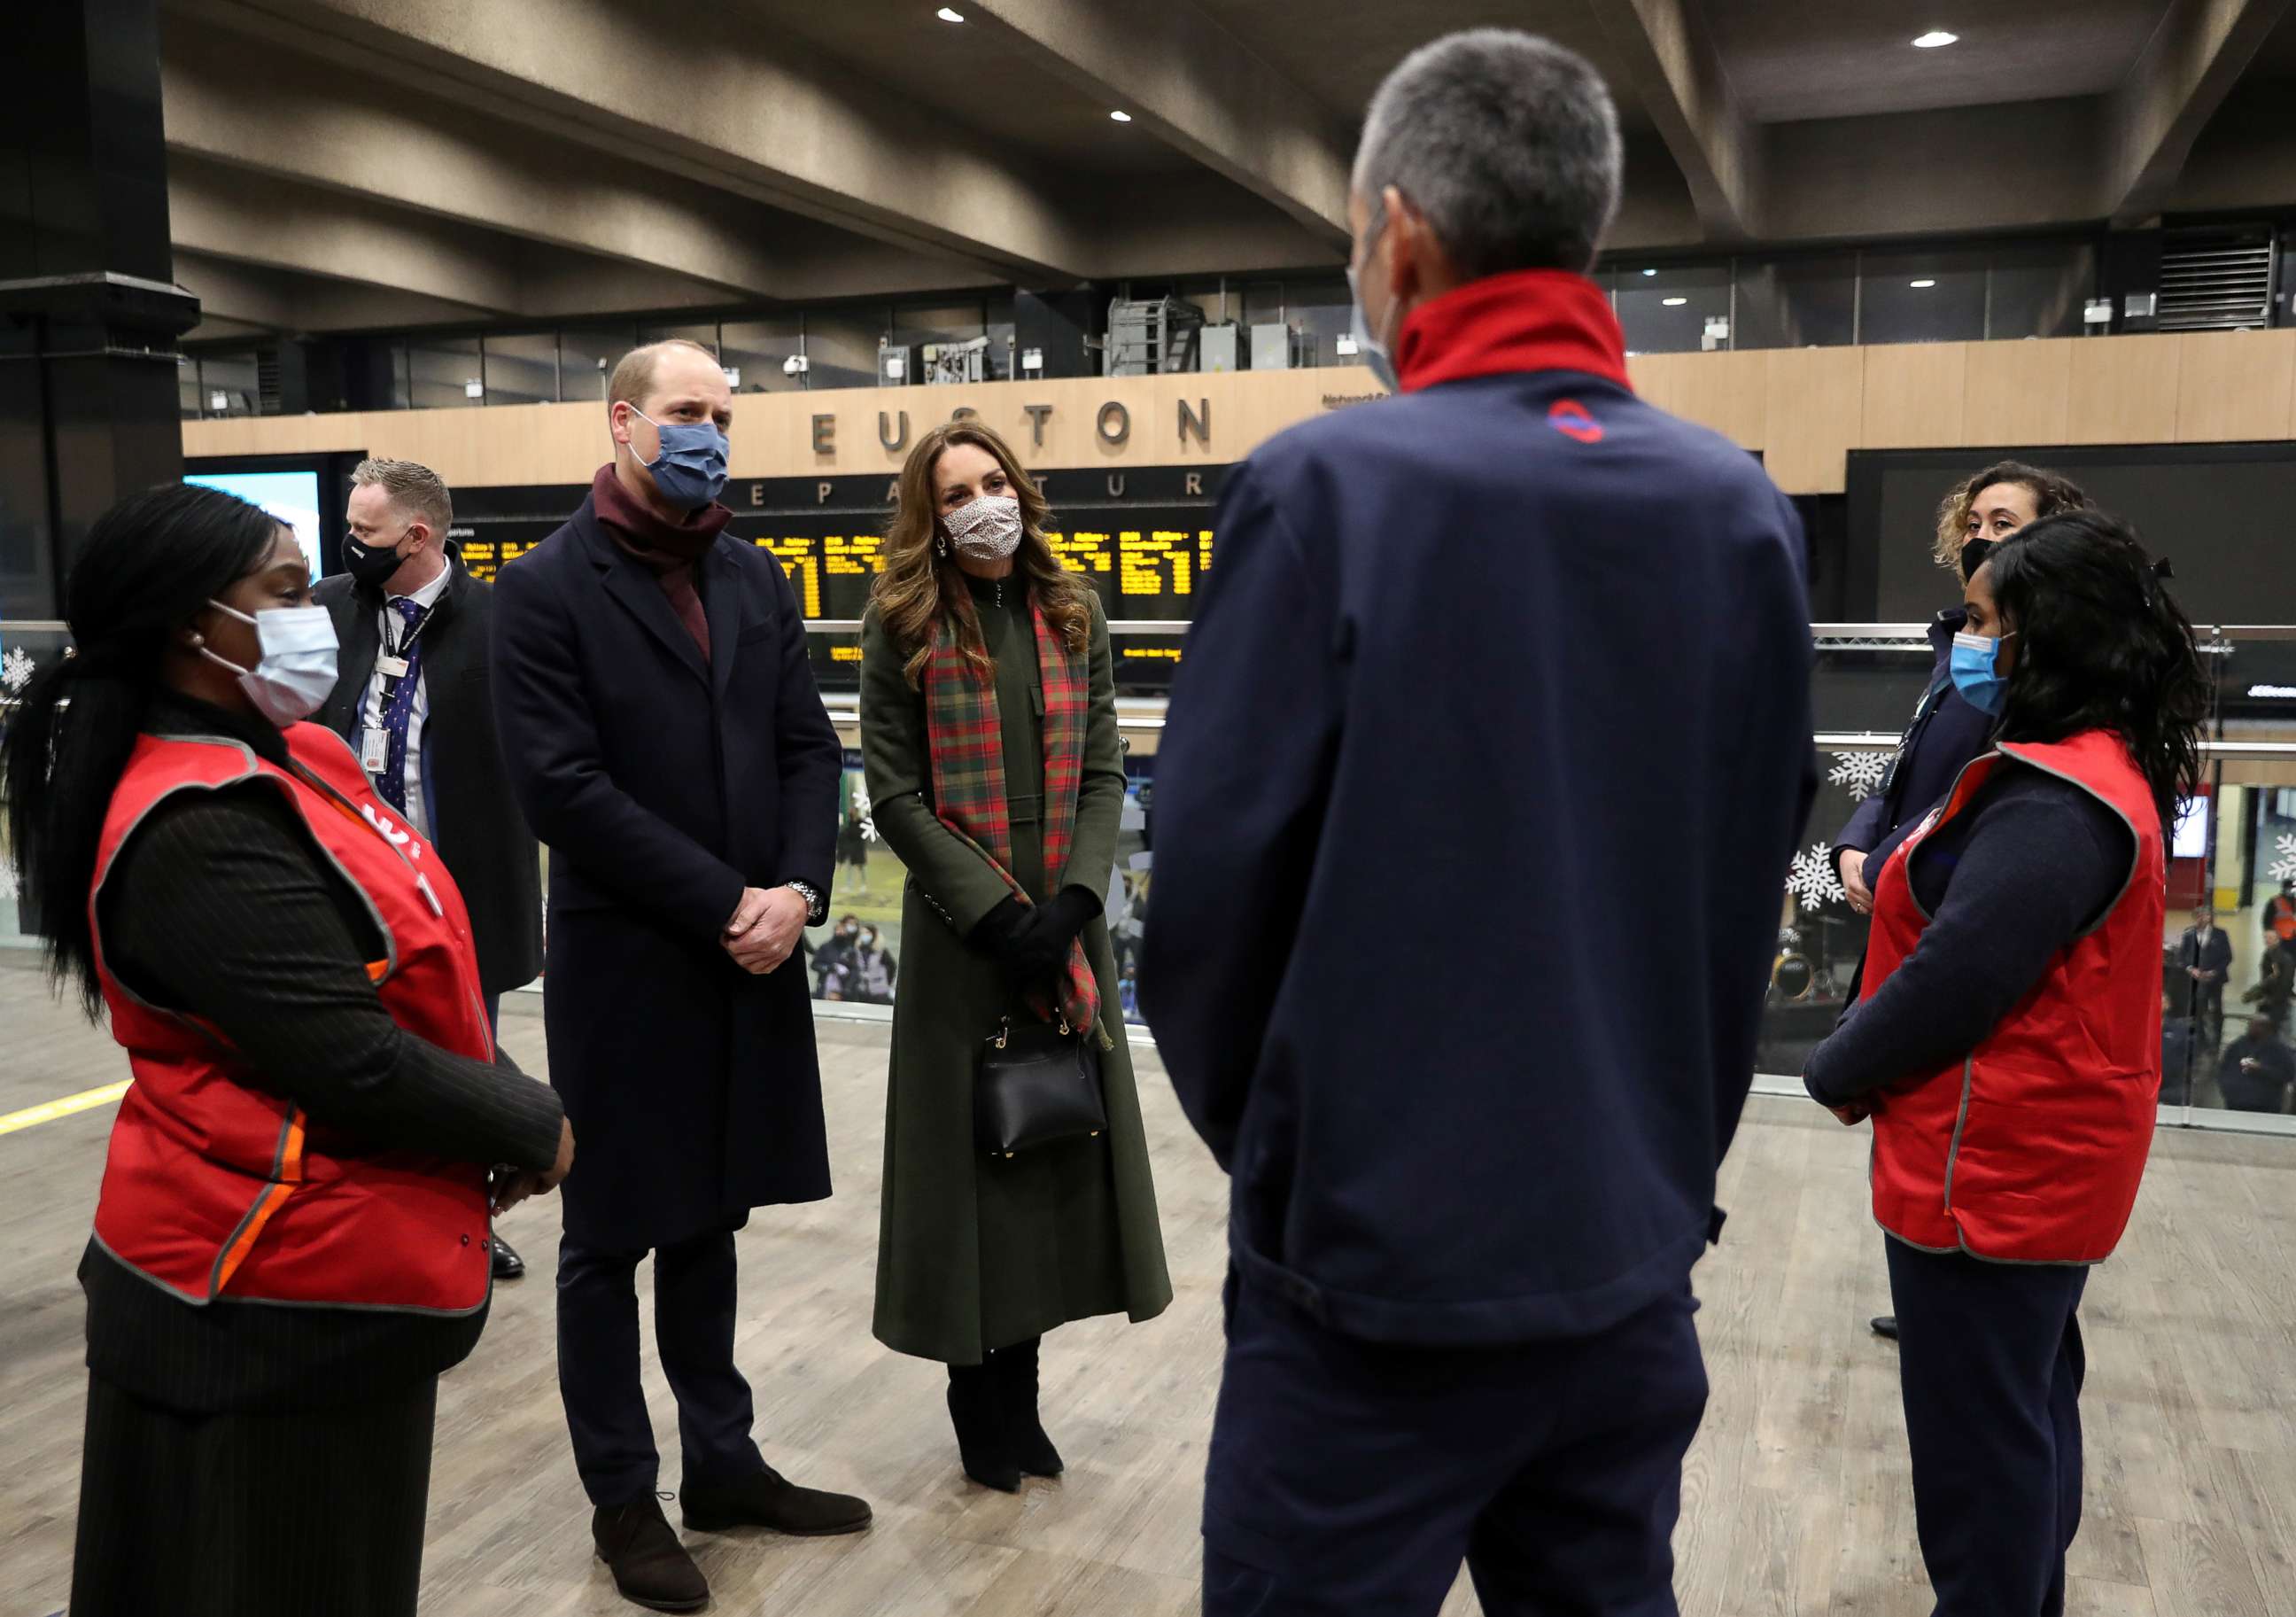 PHOTO: Britain's Prince William and Catherine, Duchess of Cambridge, speak to transport workers at London Euston Station